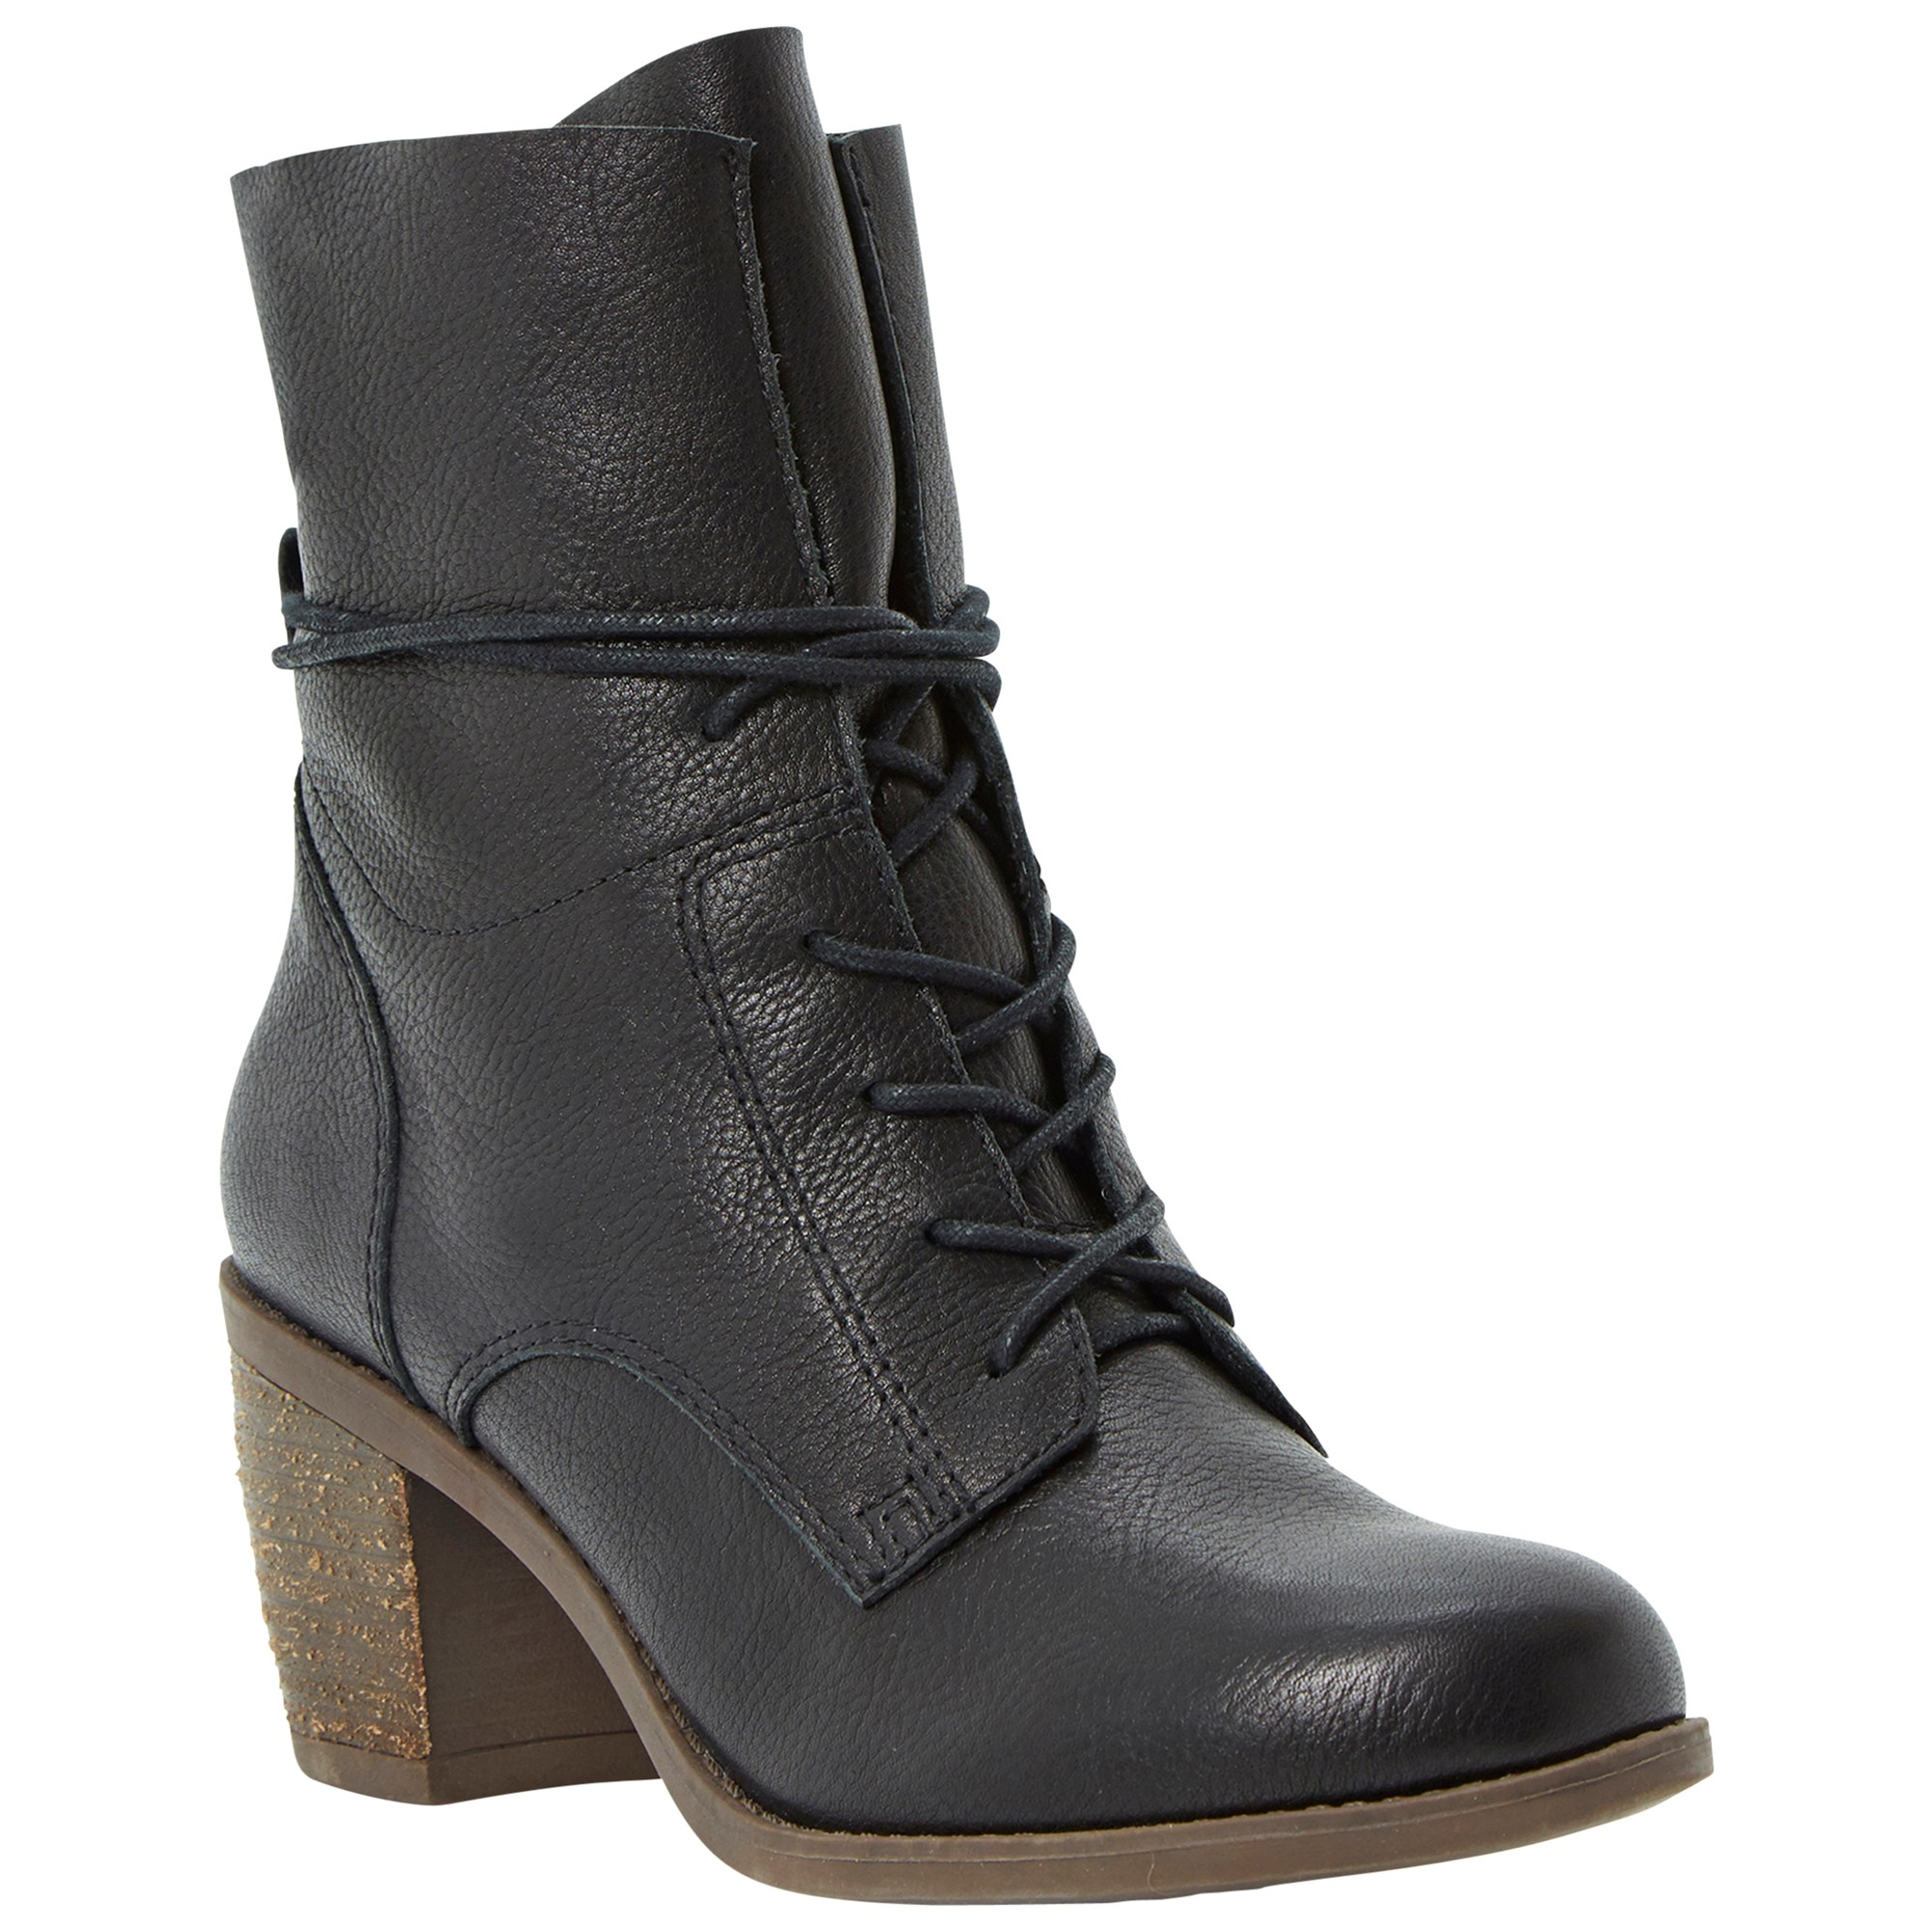 Steve Madden Gretchun Leather Mid Block Heel Calf Boots in Black | Lyst